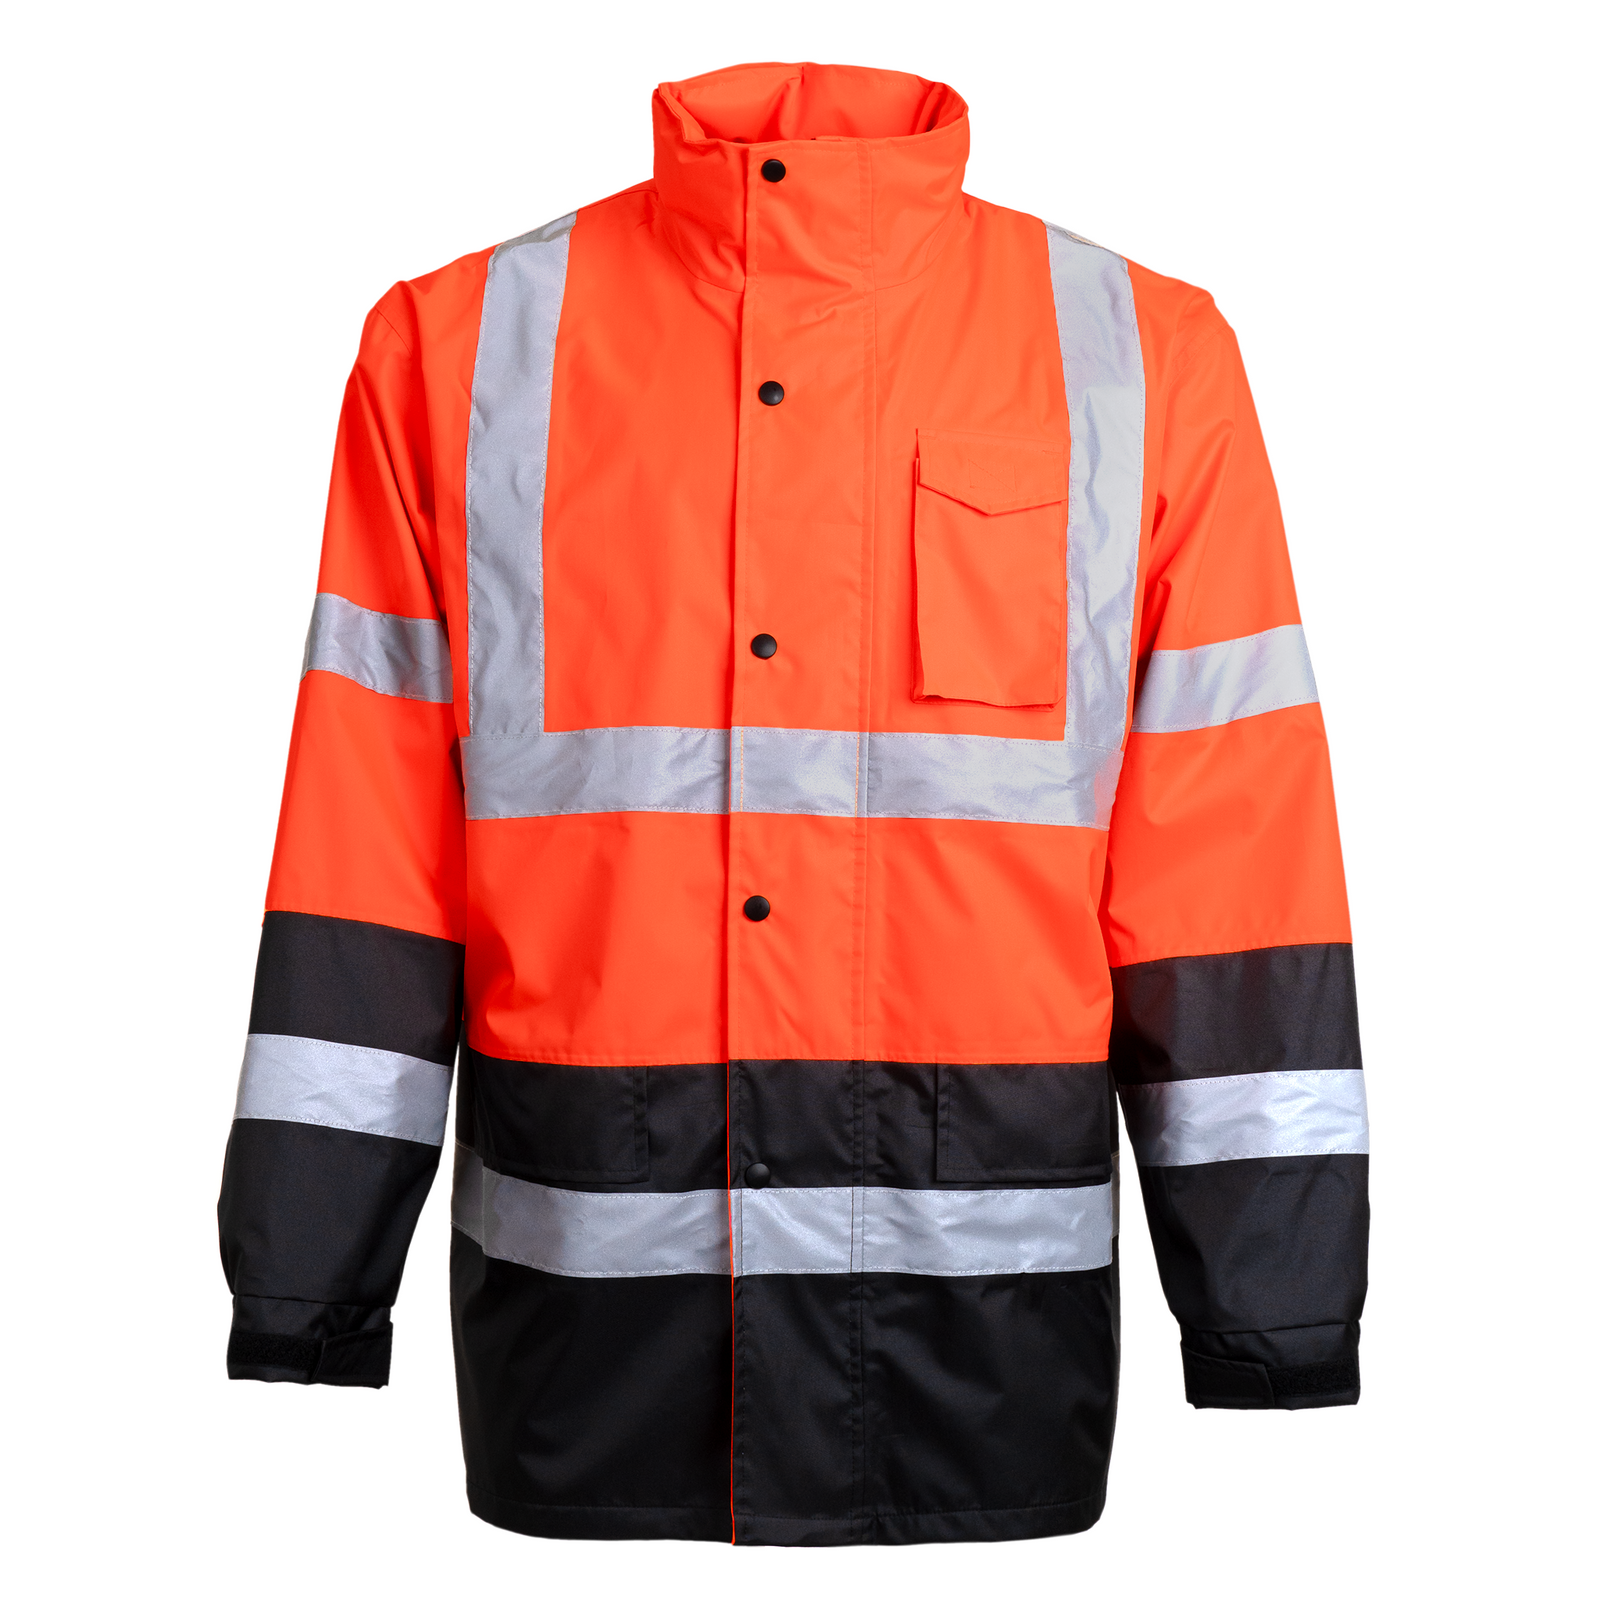 Front view of a JORESTECH High visibility orange and black rain jacket with 2 inches reflective strips and hoodie